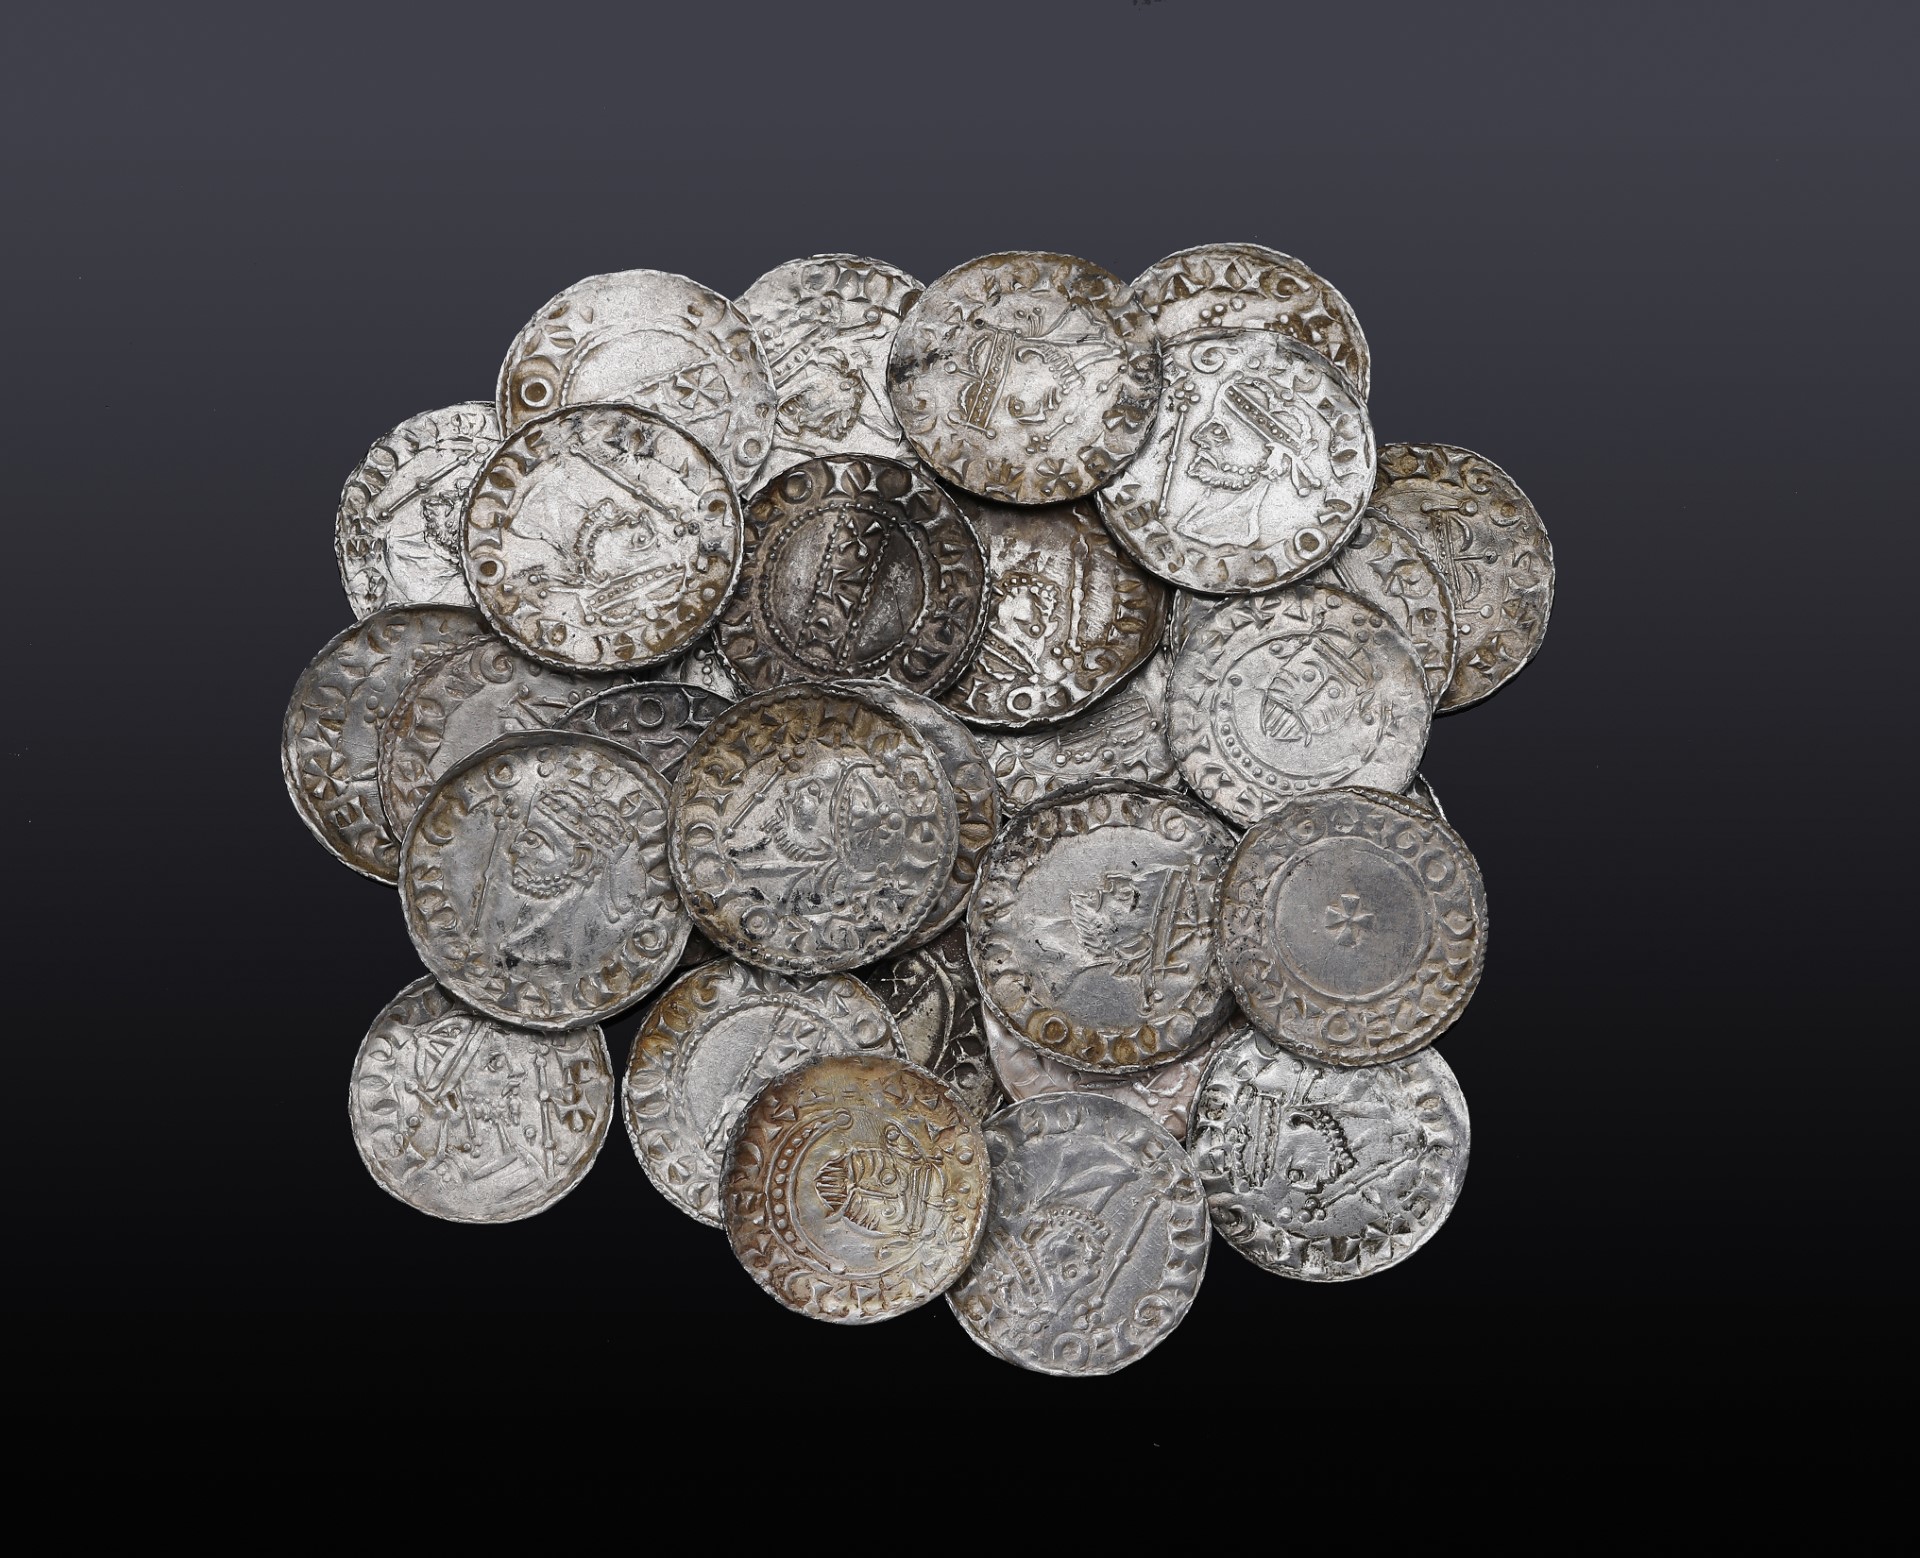 122 Anglo-Saxon coins could fetch £180,000 at auction